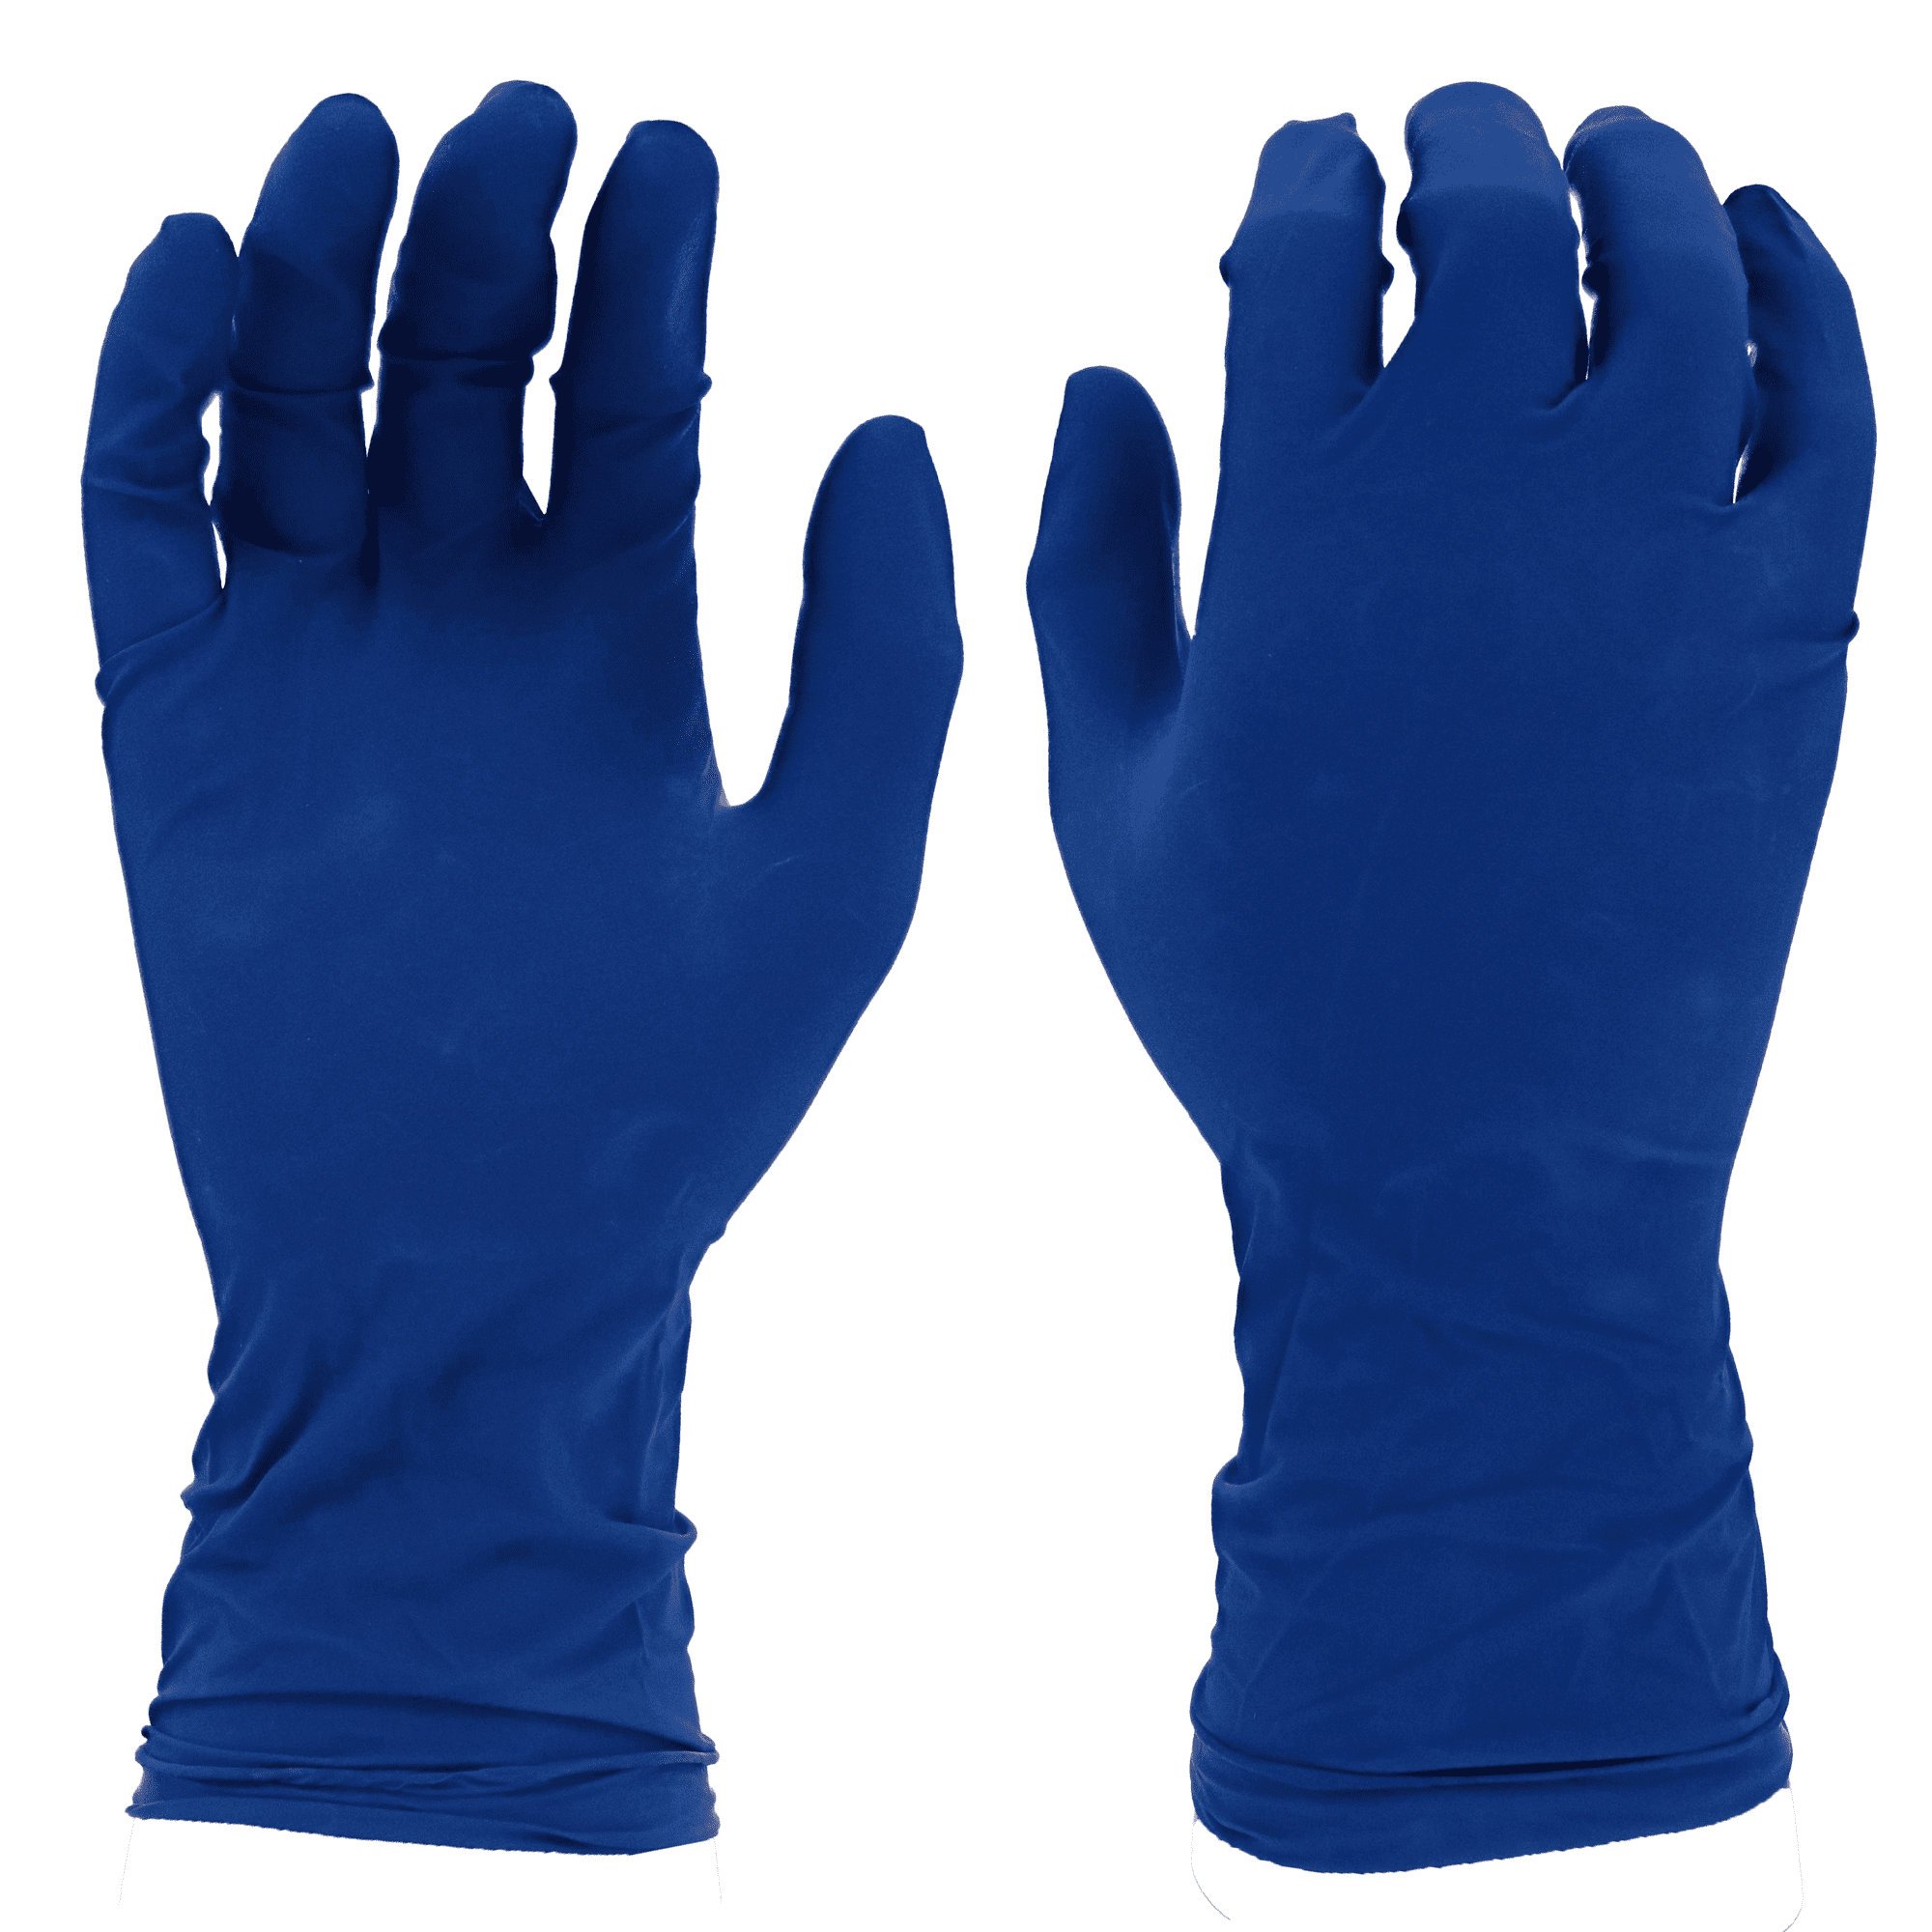 Grease Monkey Disposable Heavy-Duty Latex Work Gloves, Blue, 50